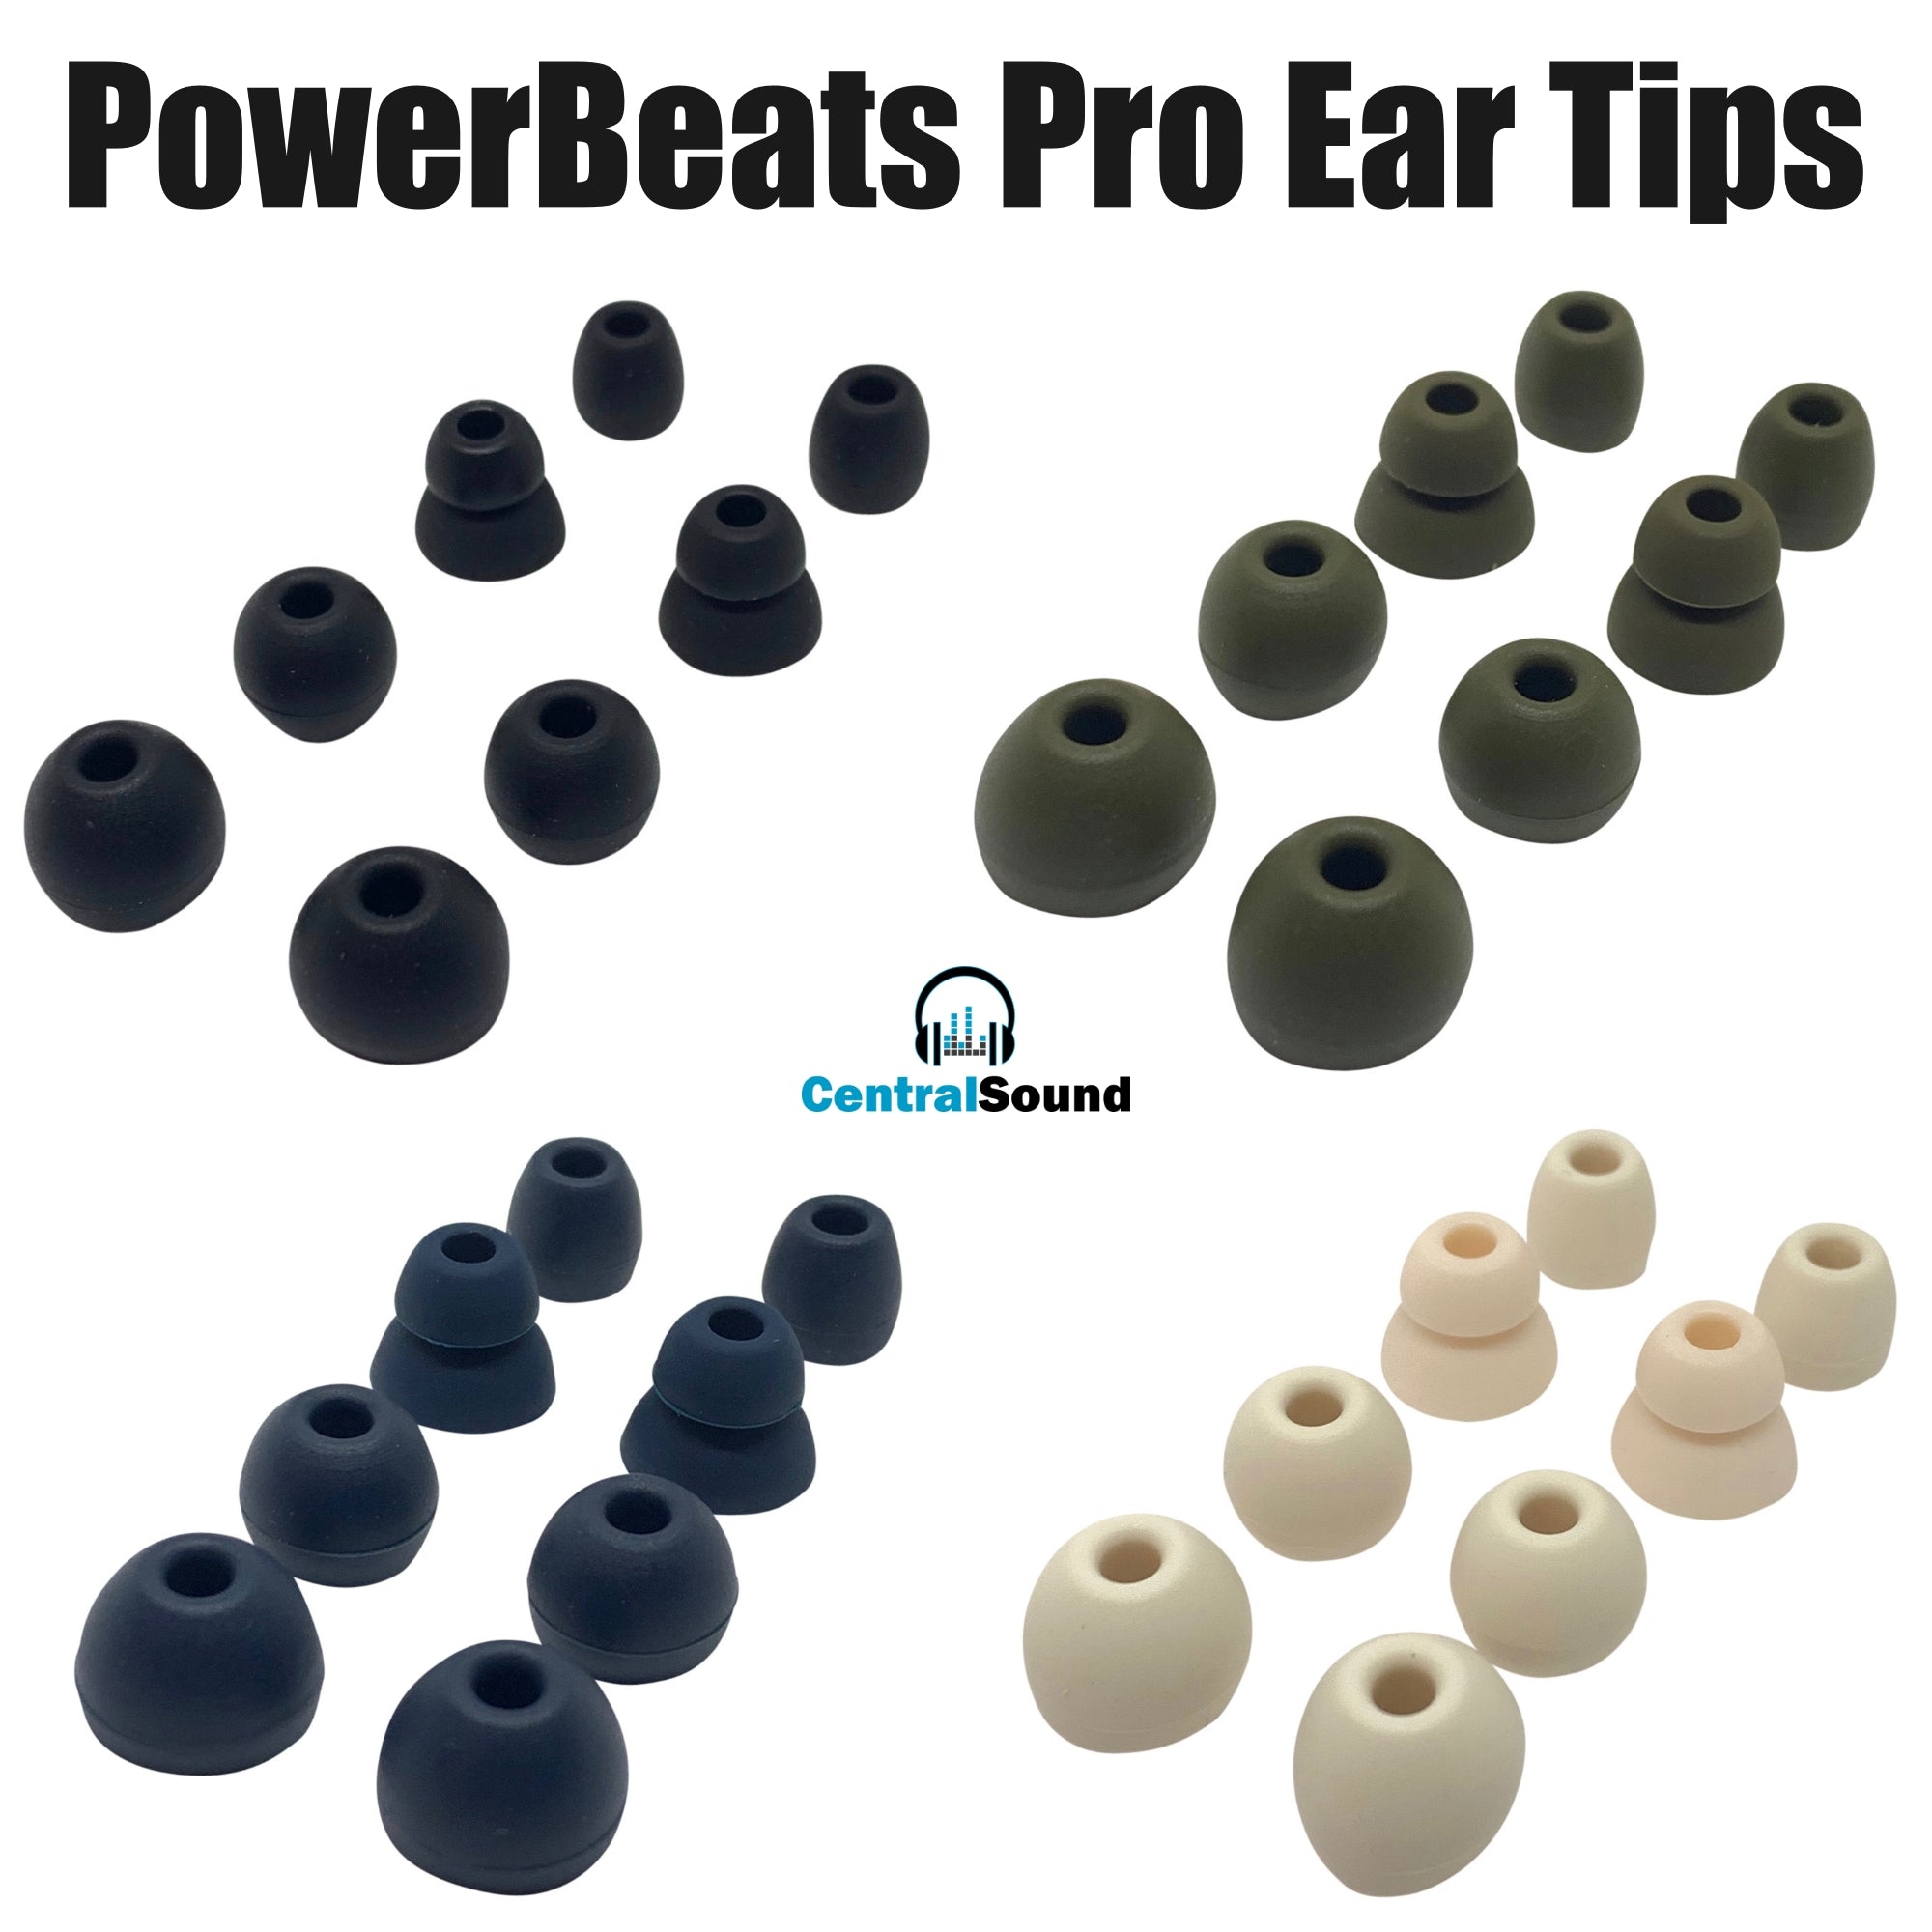 Replacement Ear Buds Tips Earbuds for PowerBeats 1 2 3 Pro Wireless Headphones - CentralSound